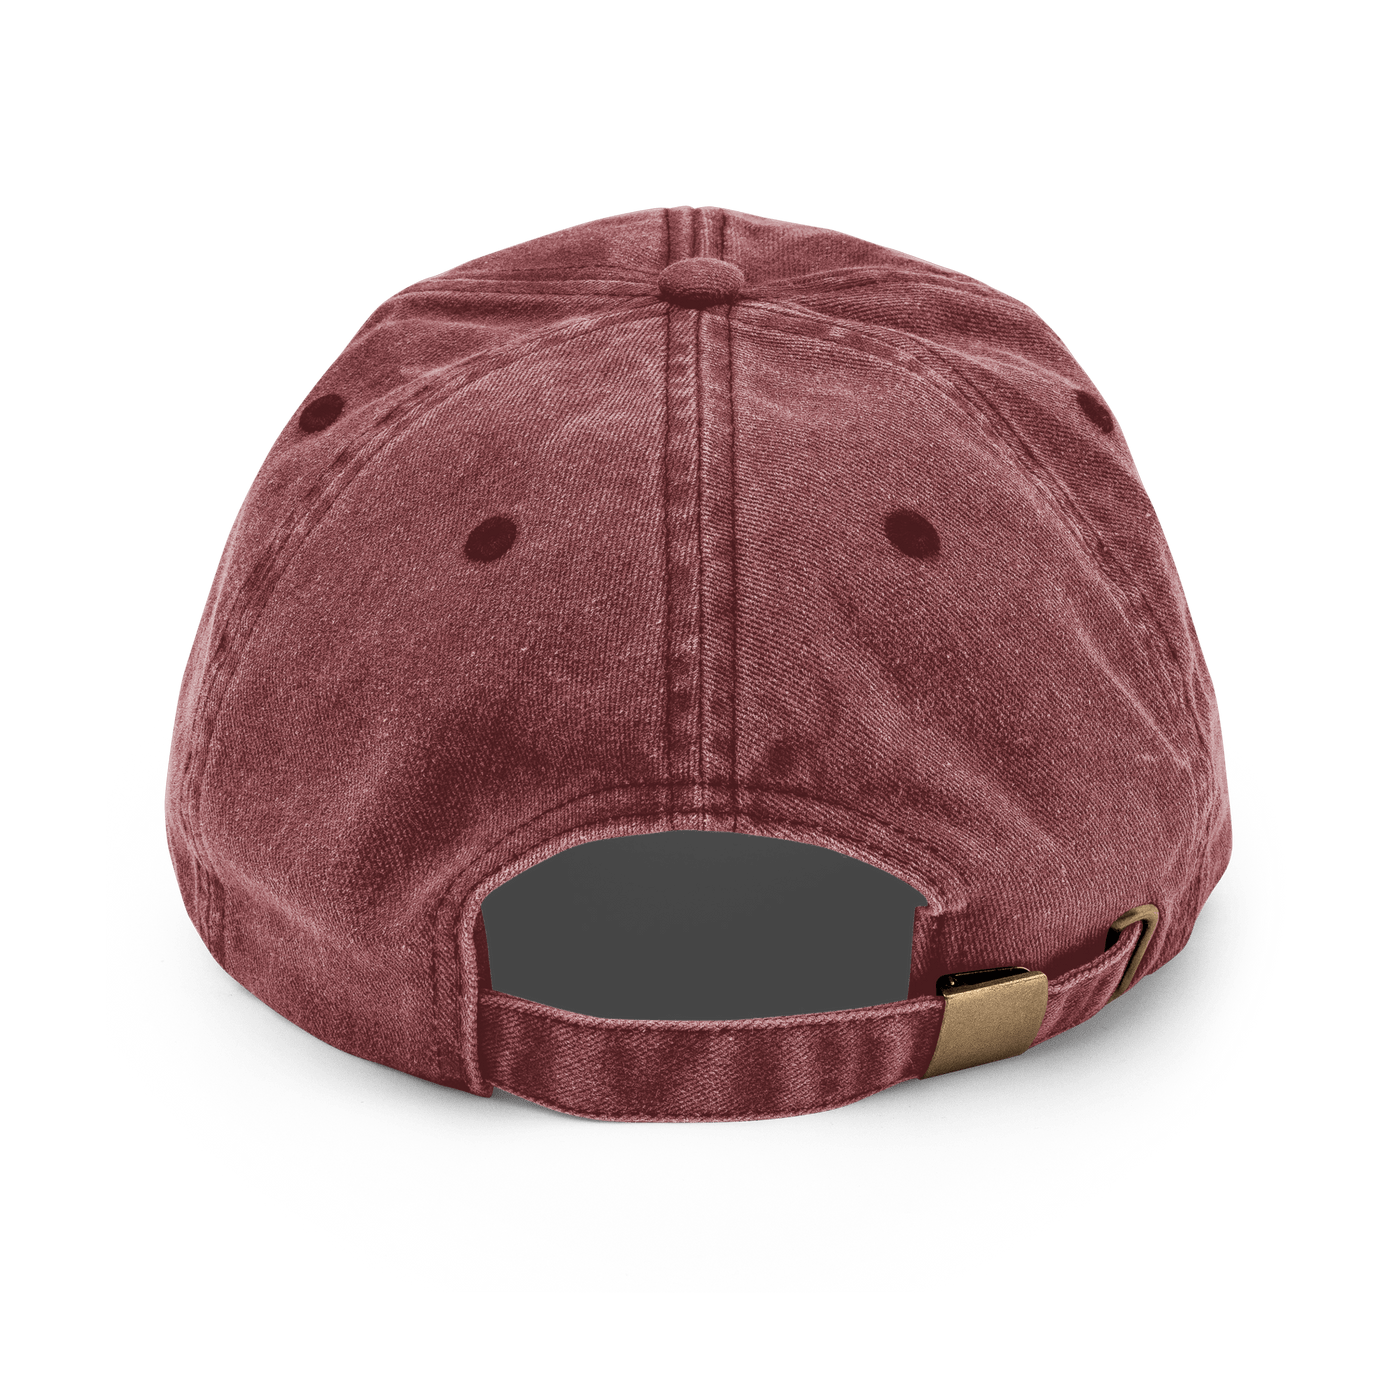 Fish & Chips Vintage Hat - Vintage Red - - Just Another Cap Store